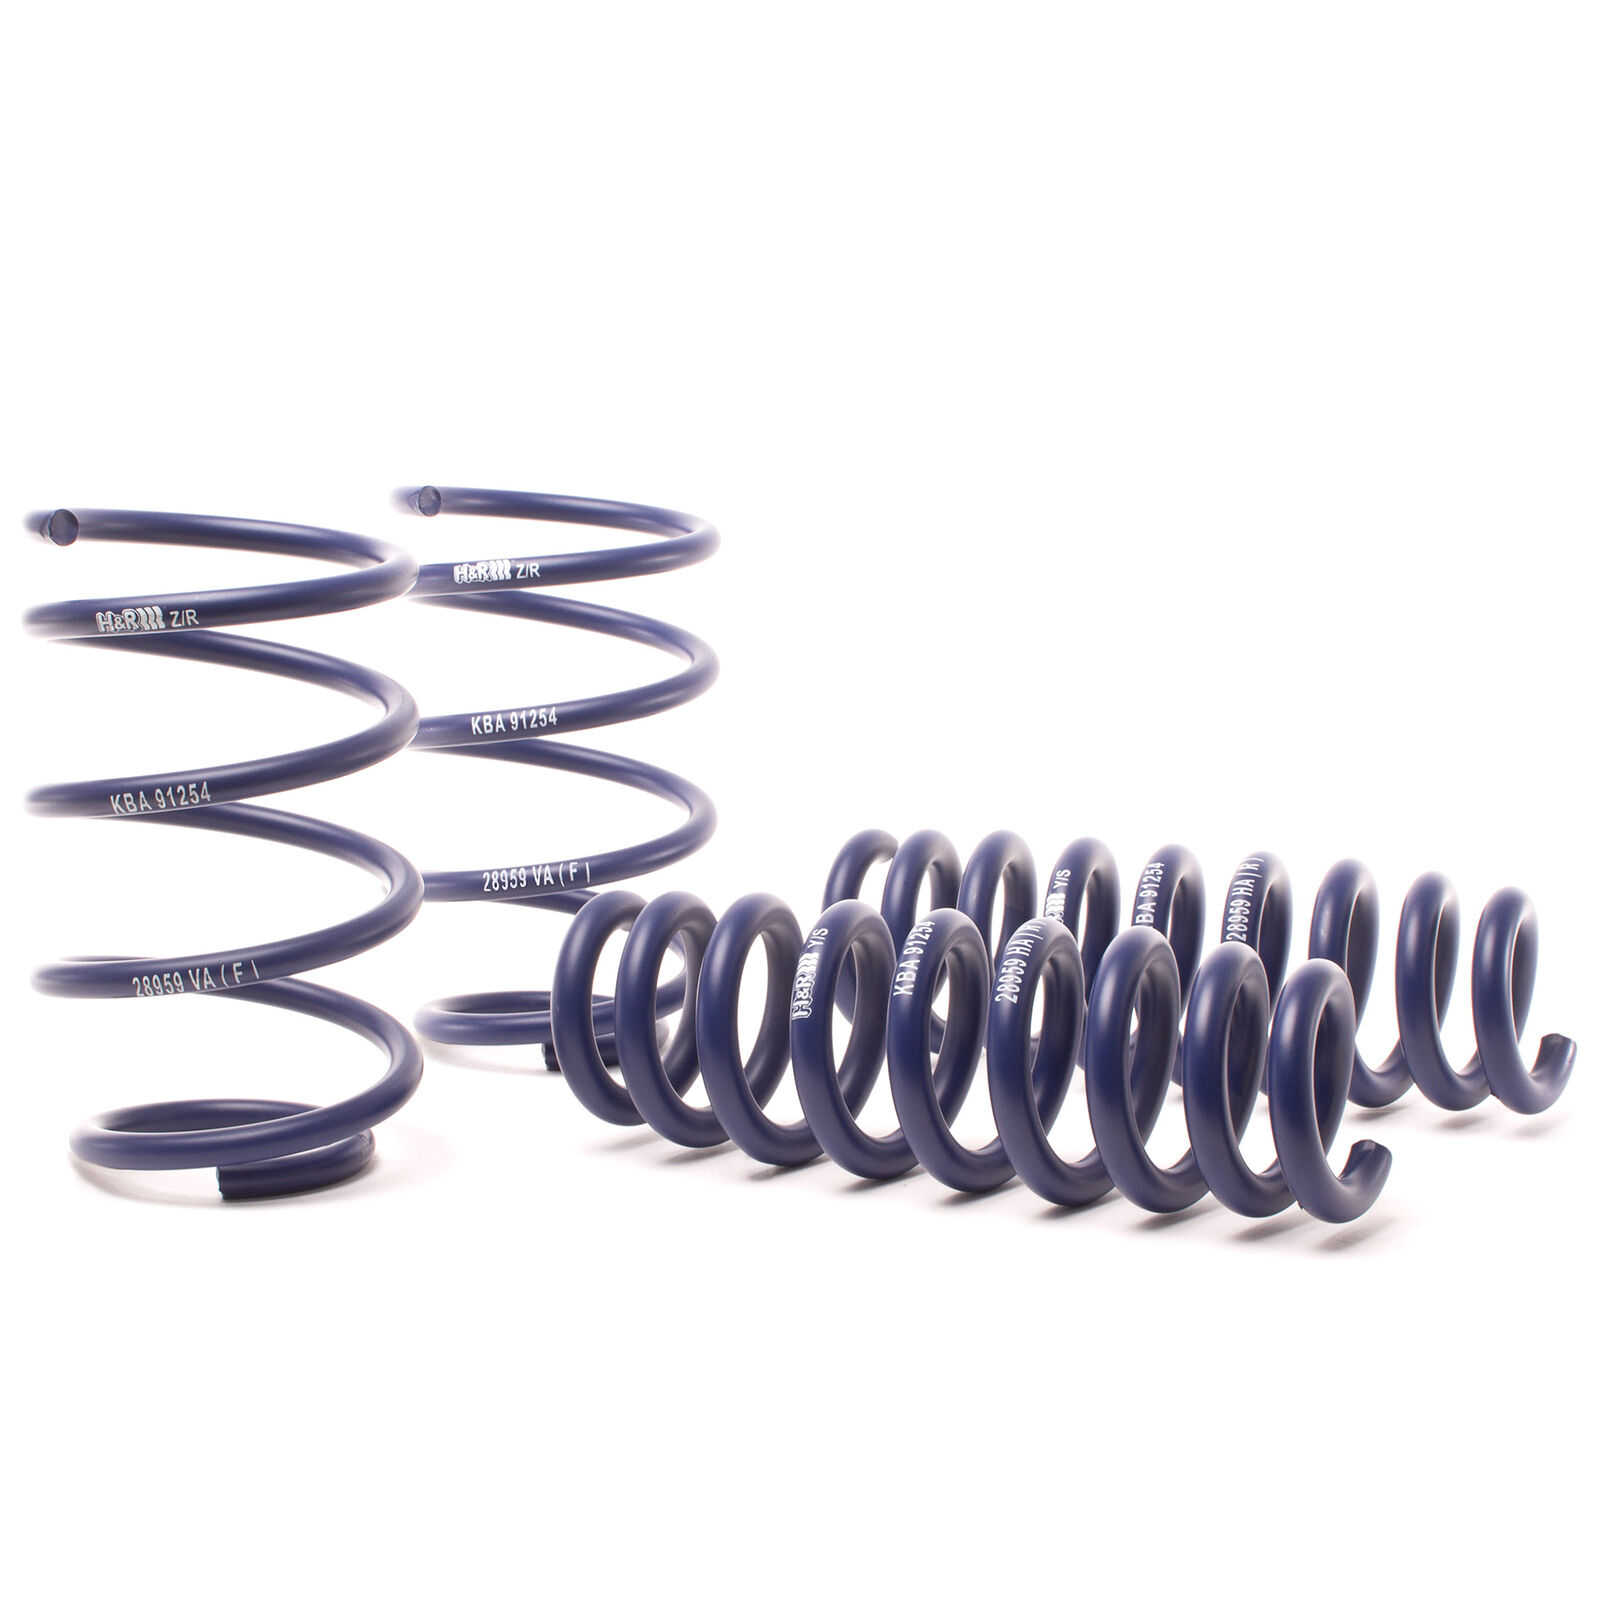 H&R 28959-1 Lowering Front and Rear Springs Kit for 2013-15 BMW X1 xDrive28i E84